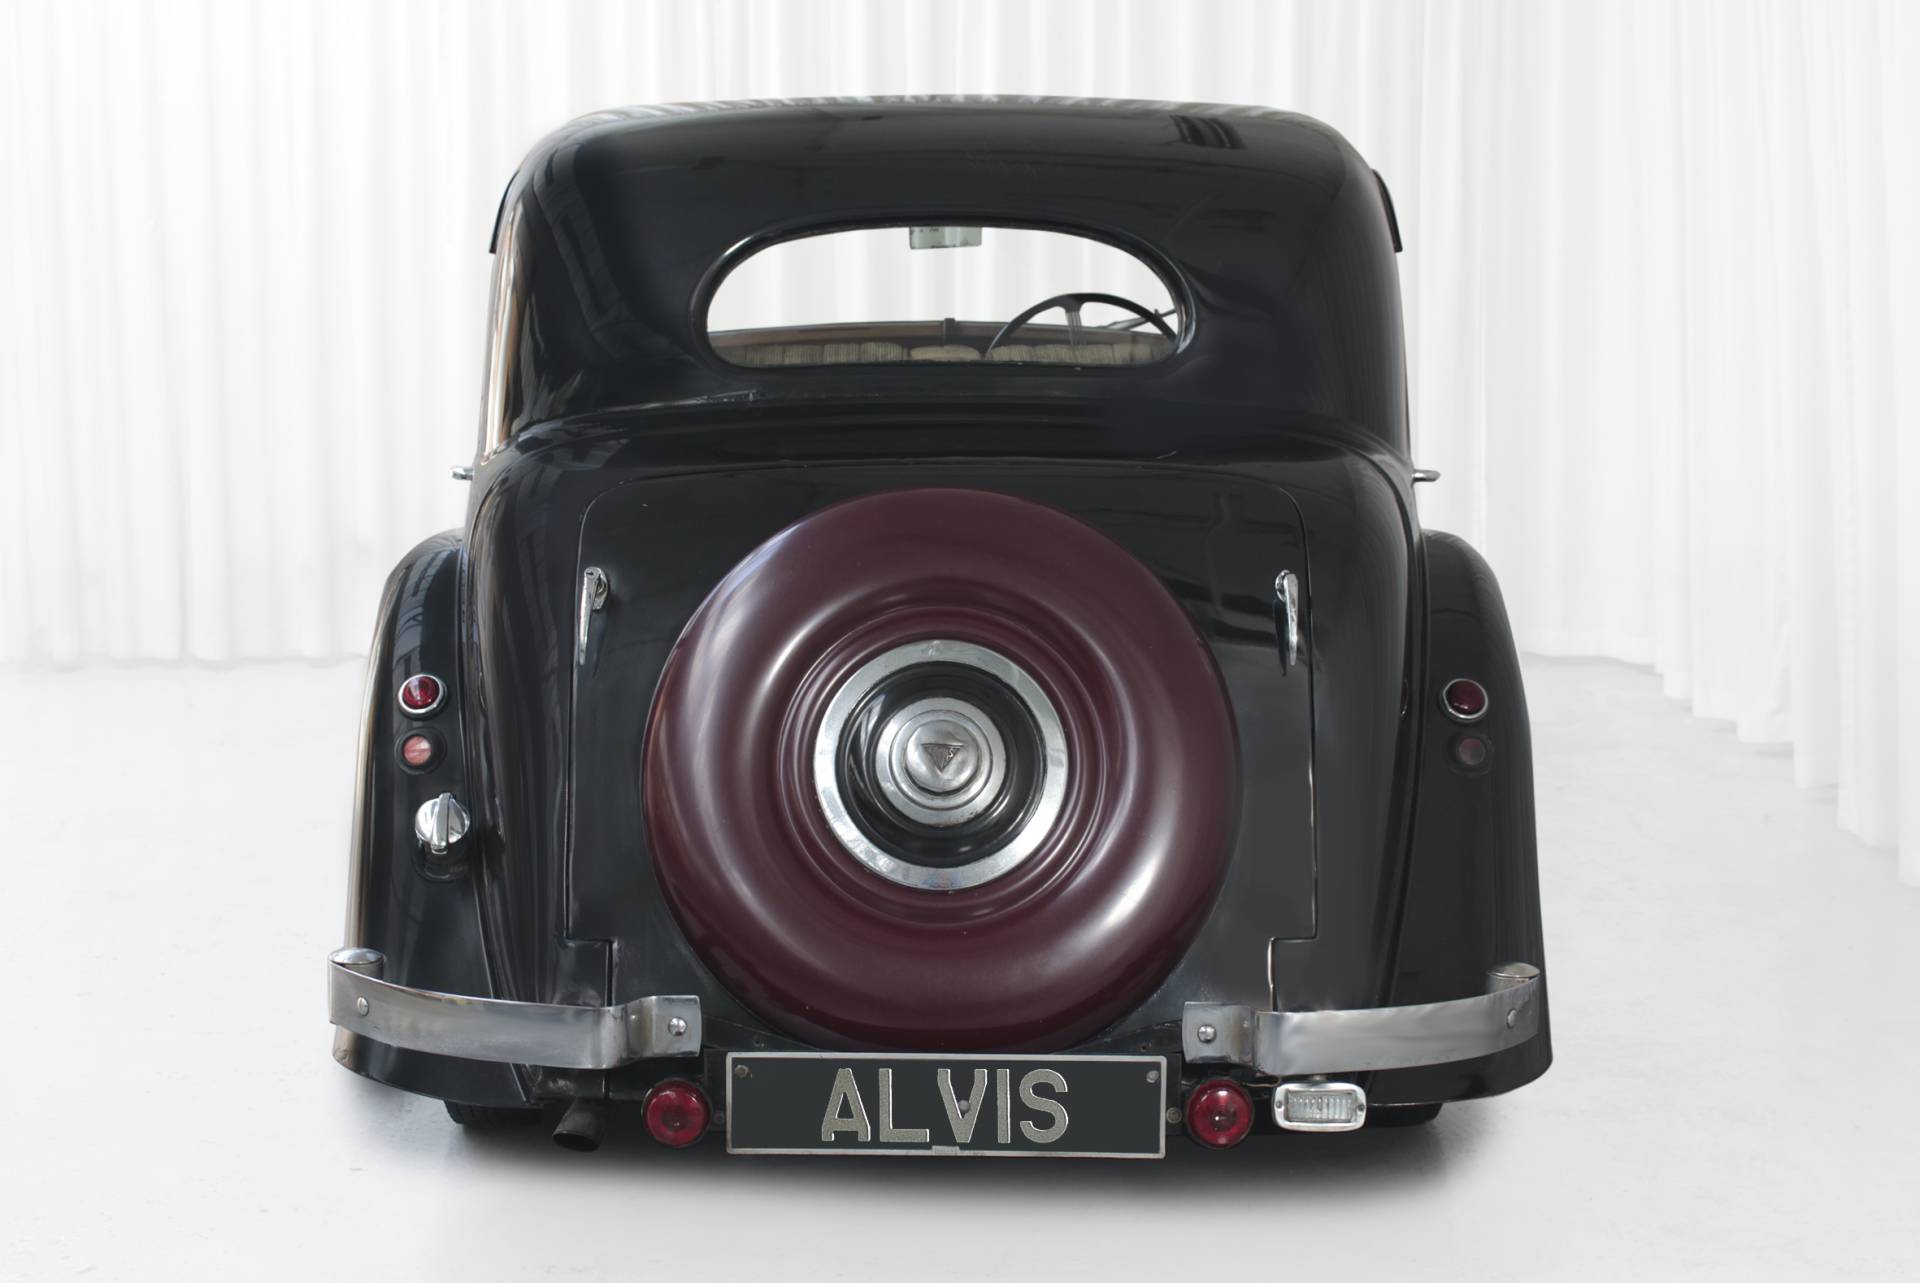 For Sale: Alvis TA 14 (1949) offered for Price on request